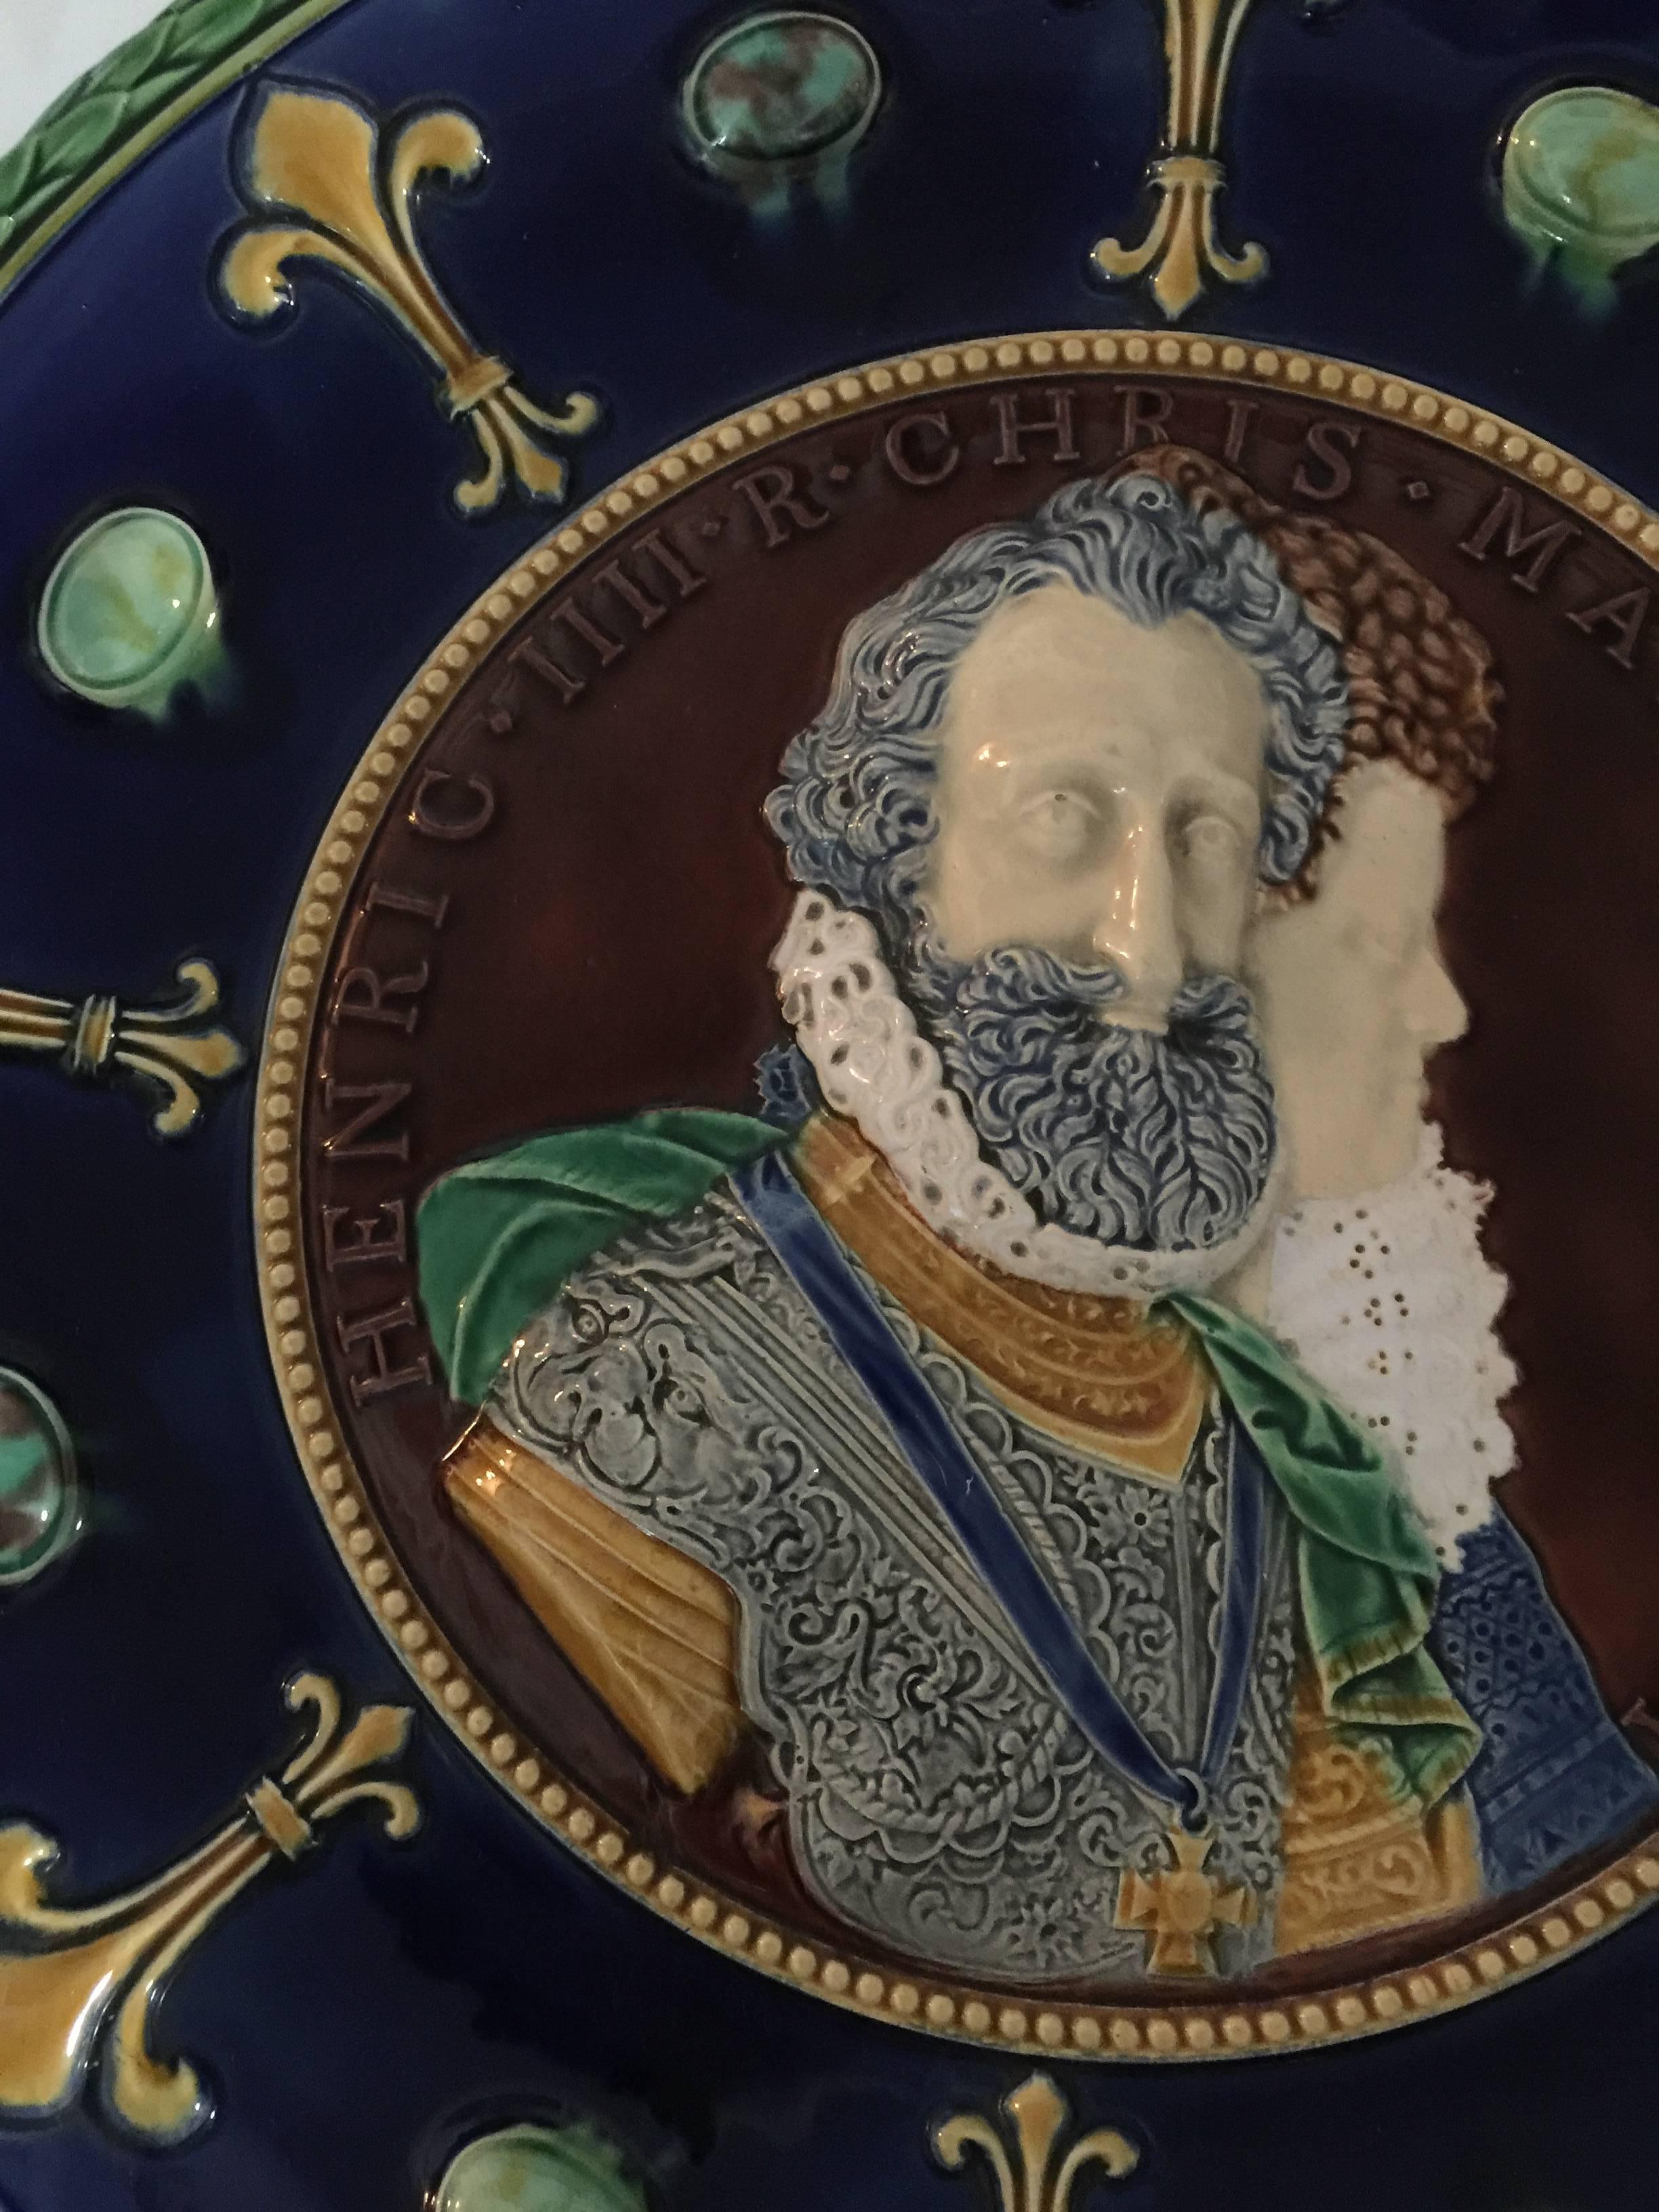 Molded in high relief with a 3/4 length portrait of Henri IV and profile of Maria de Medici, after Guillaume Dupre, circa 1605. inscribed 'HENRIC IIII R CHRIS MARIA AVGVSTA, with in a dark blue ground of yellow fleur de lys and green oval bosses.